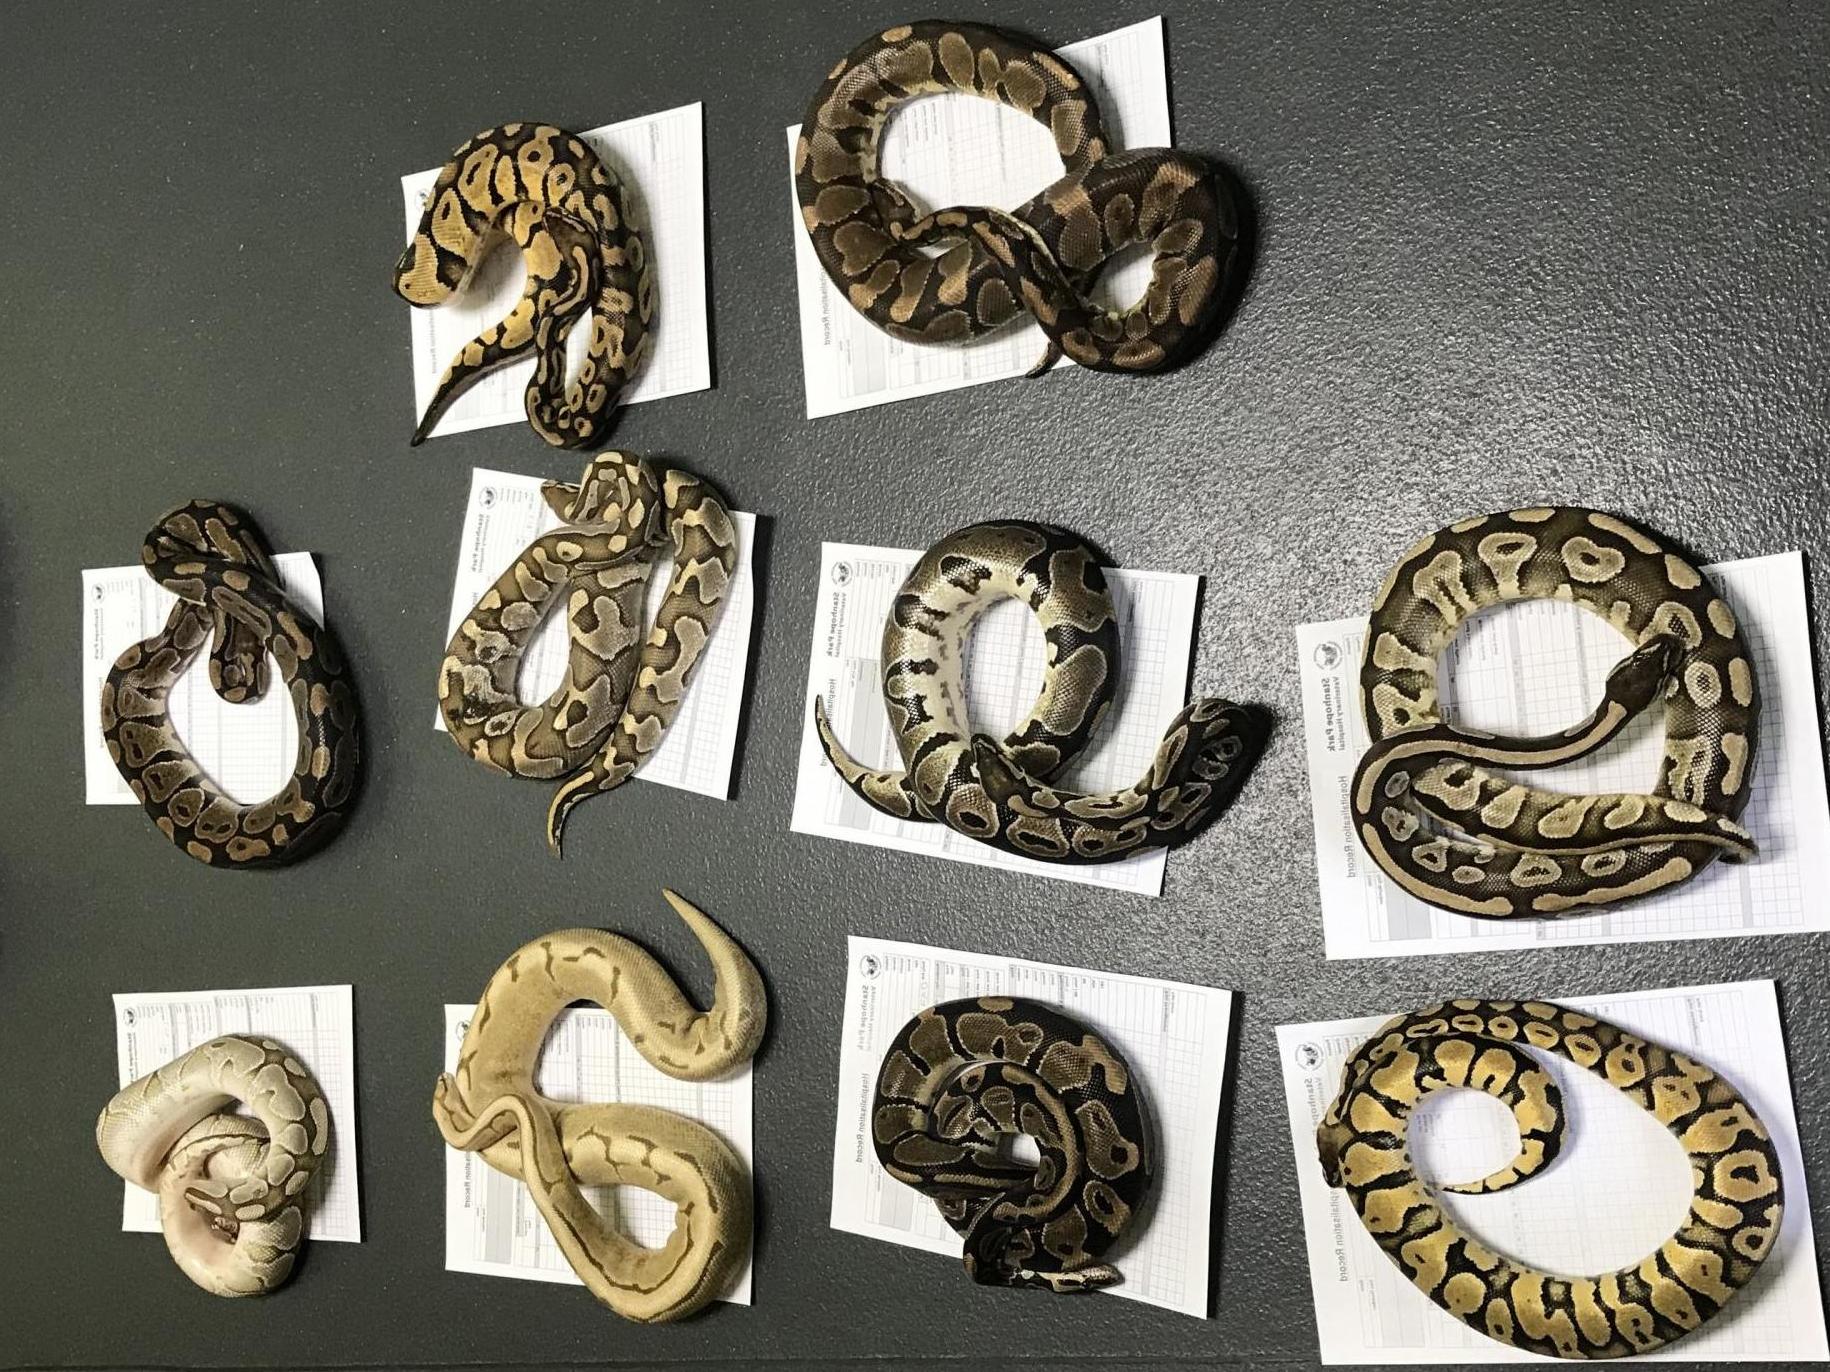 The snakes were found abandoned in pillowcases outside Farringdon fire station in Sunderland